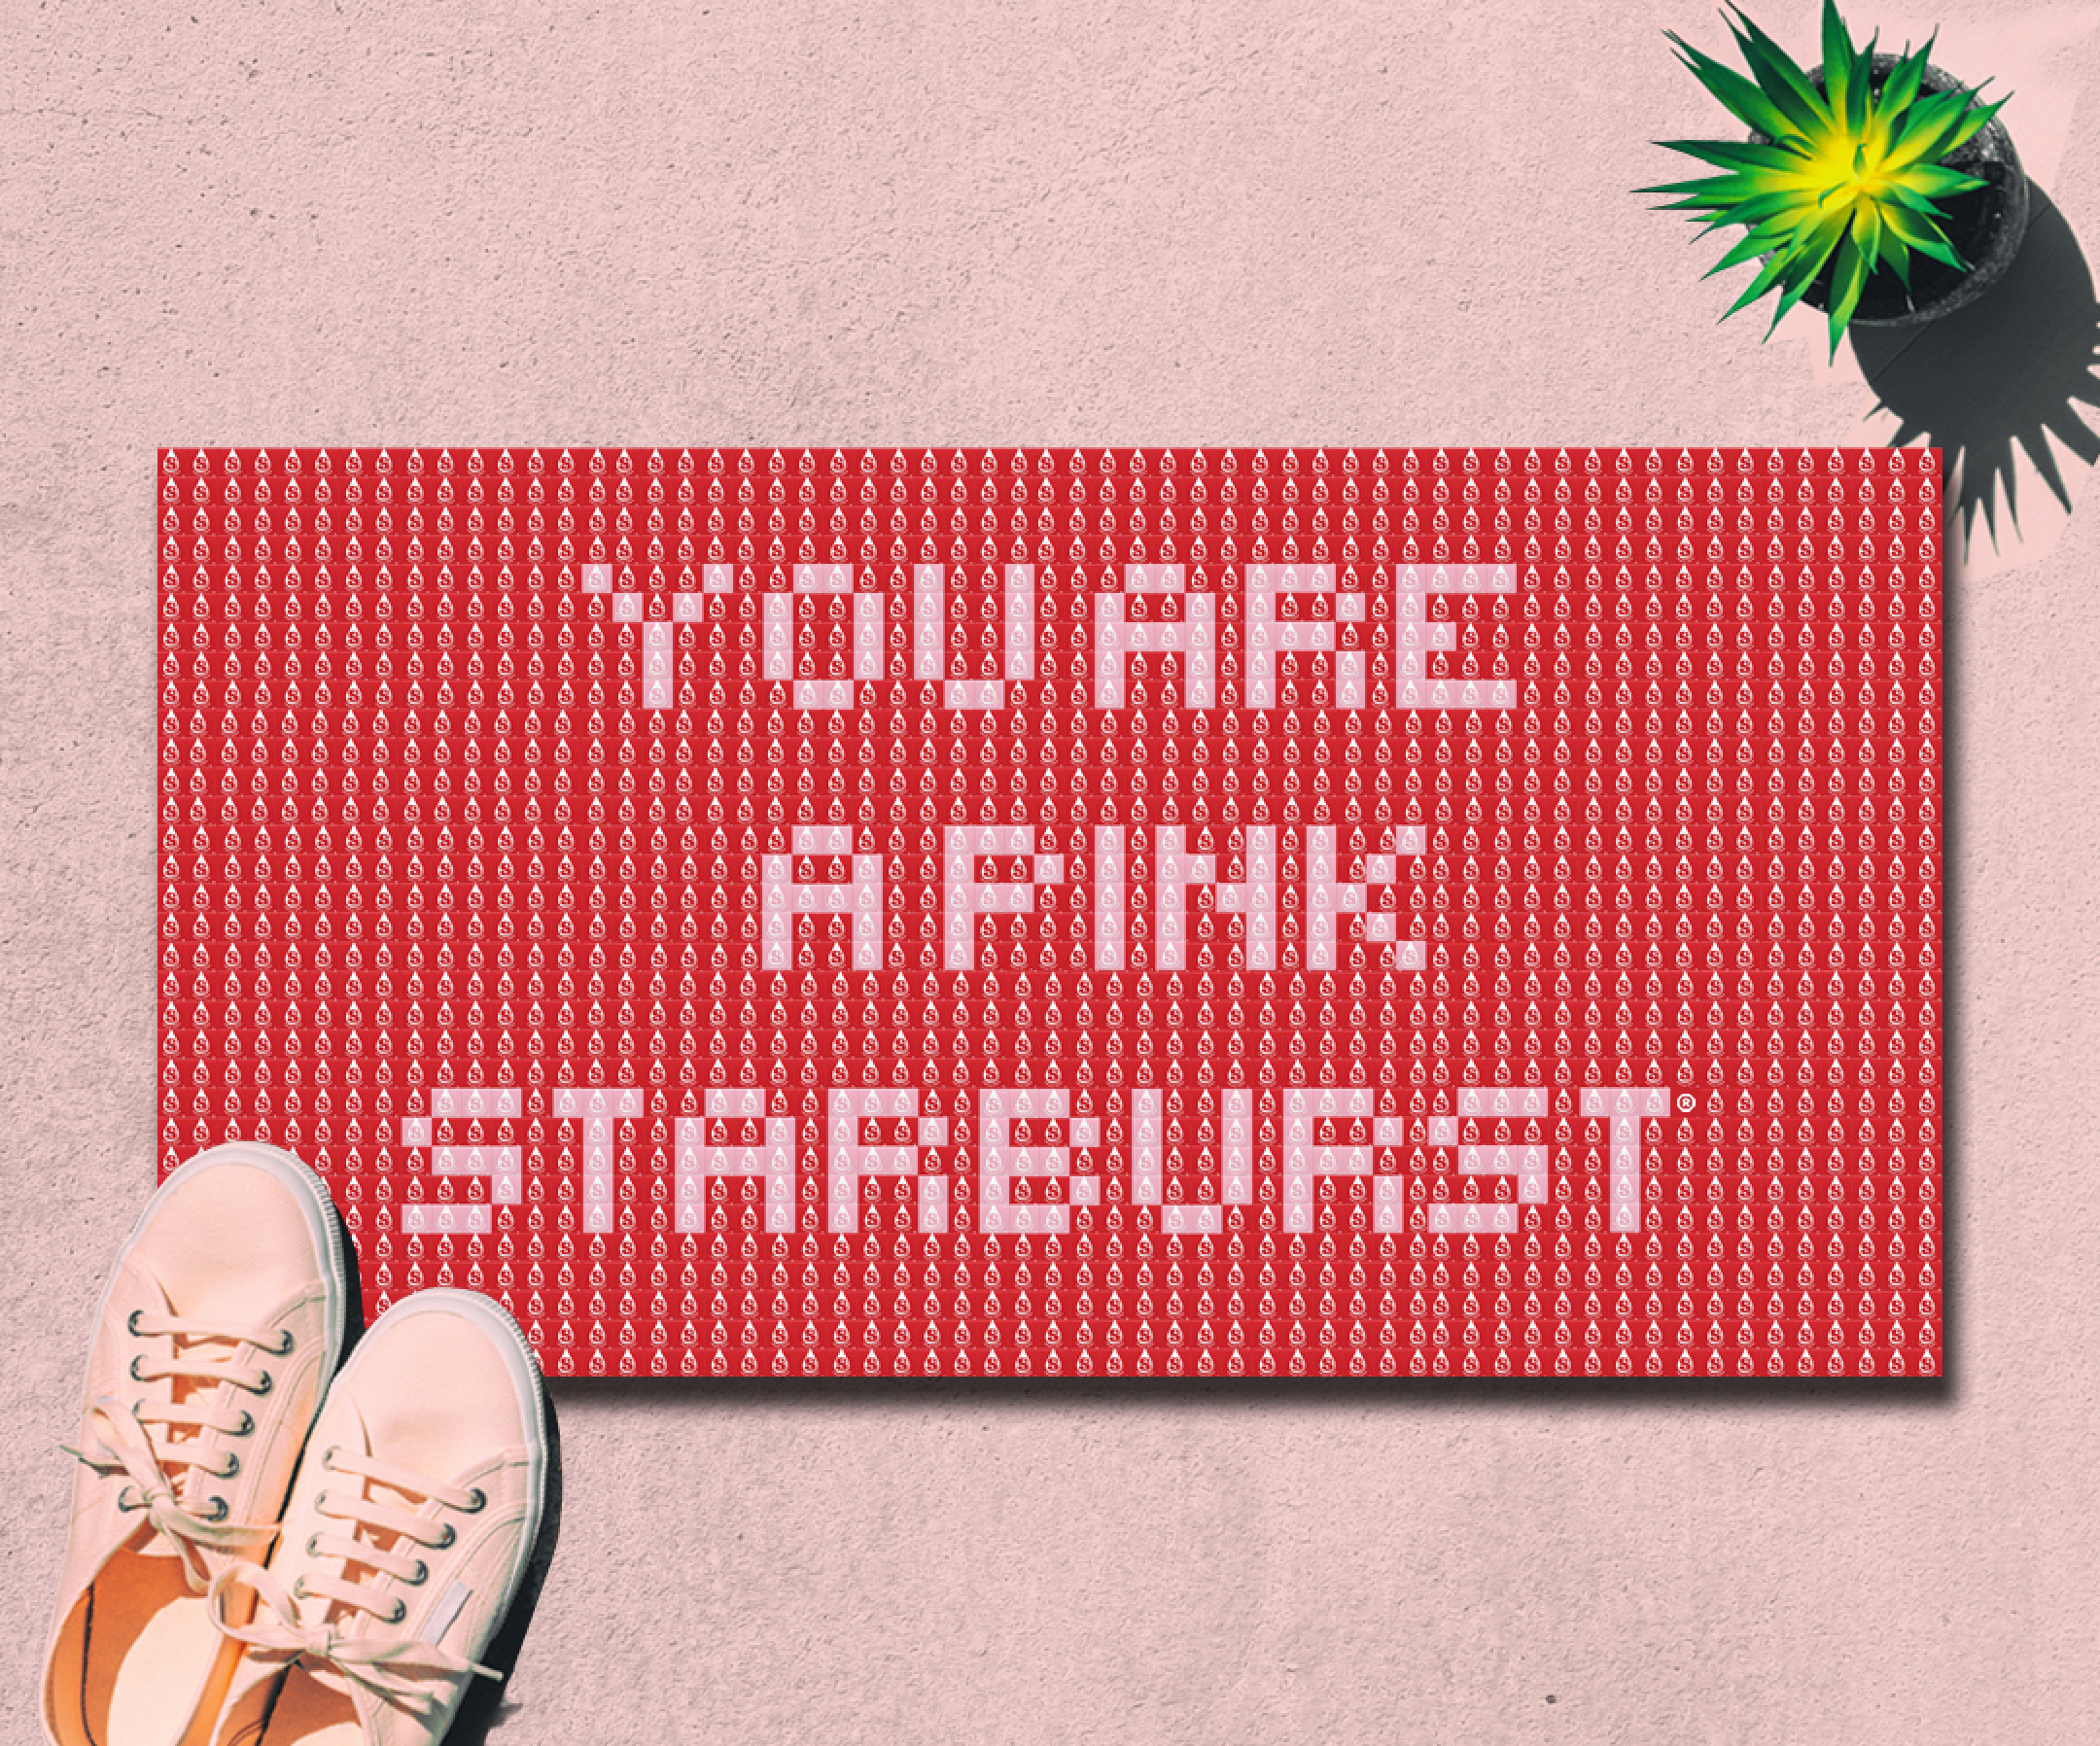 Floor mat of red and pink Starbursts with the words "You Are a Pink Starburst" spelled out